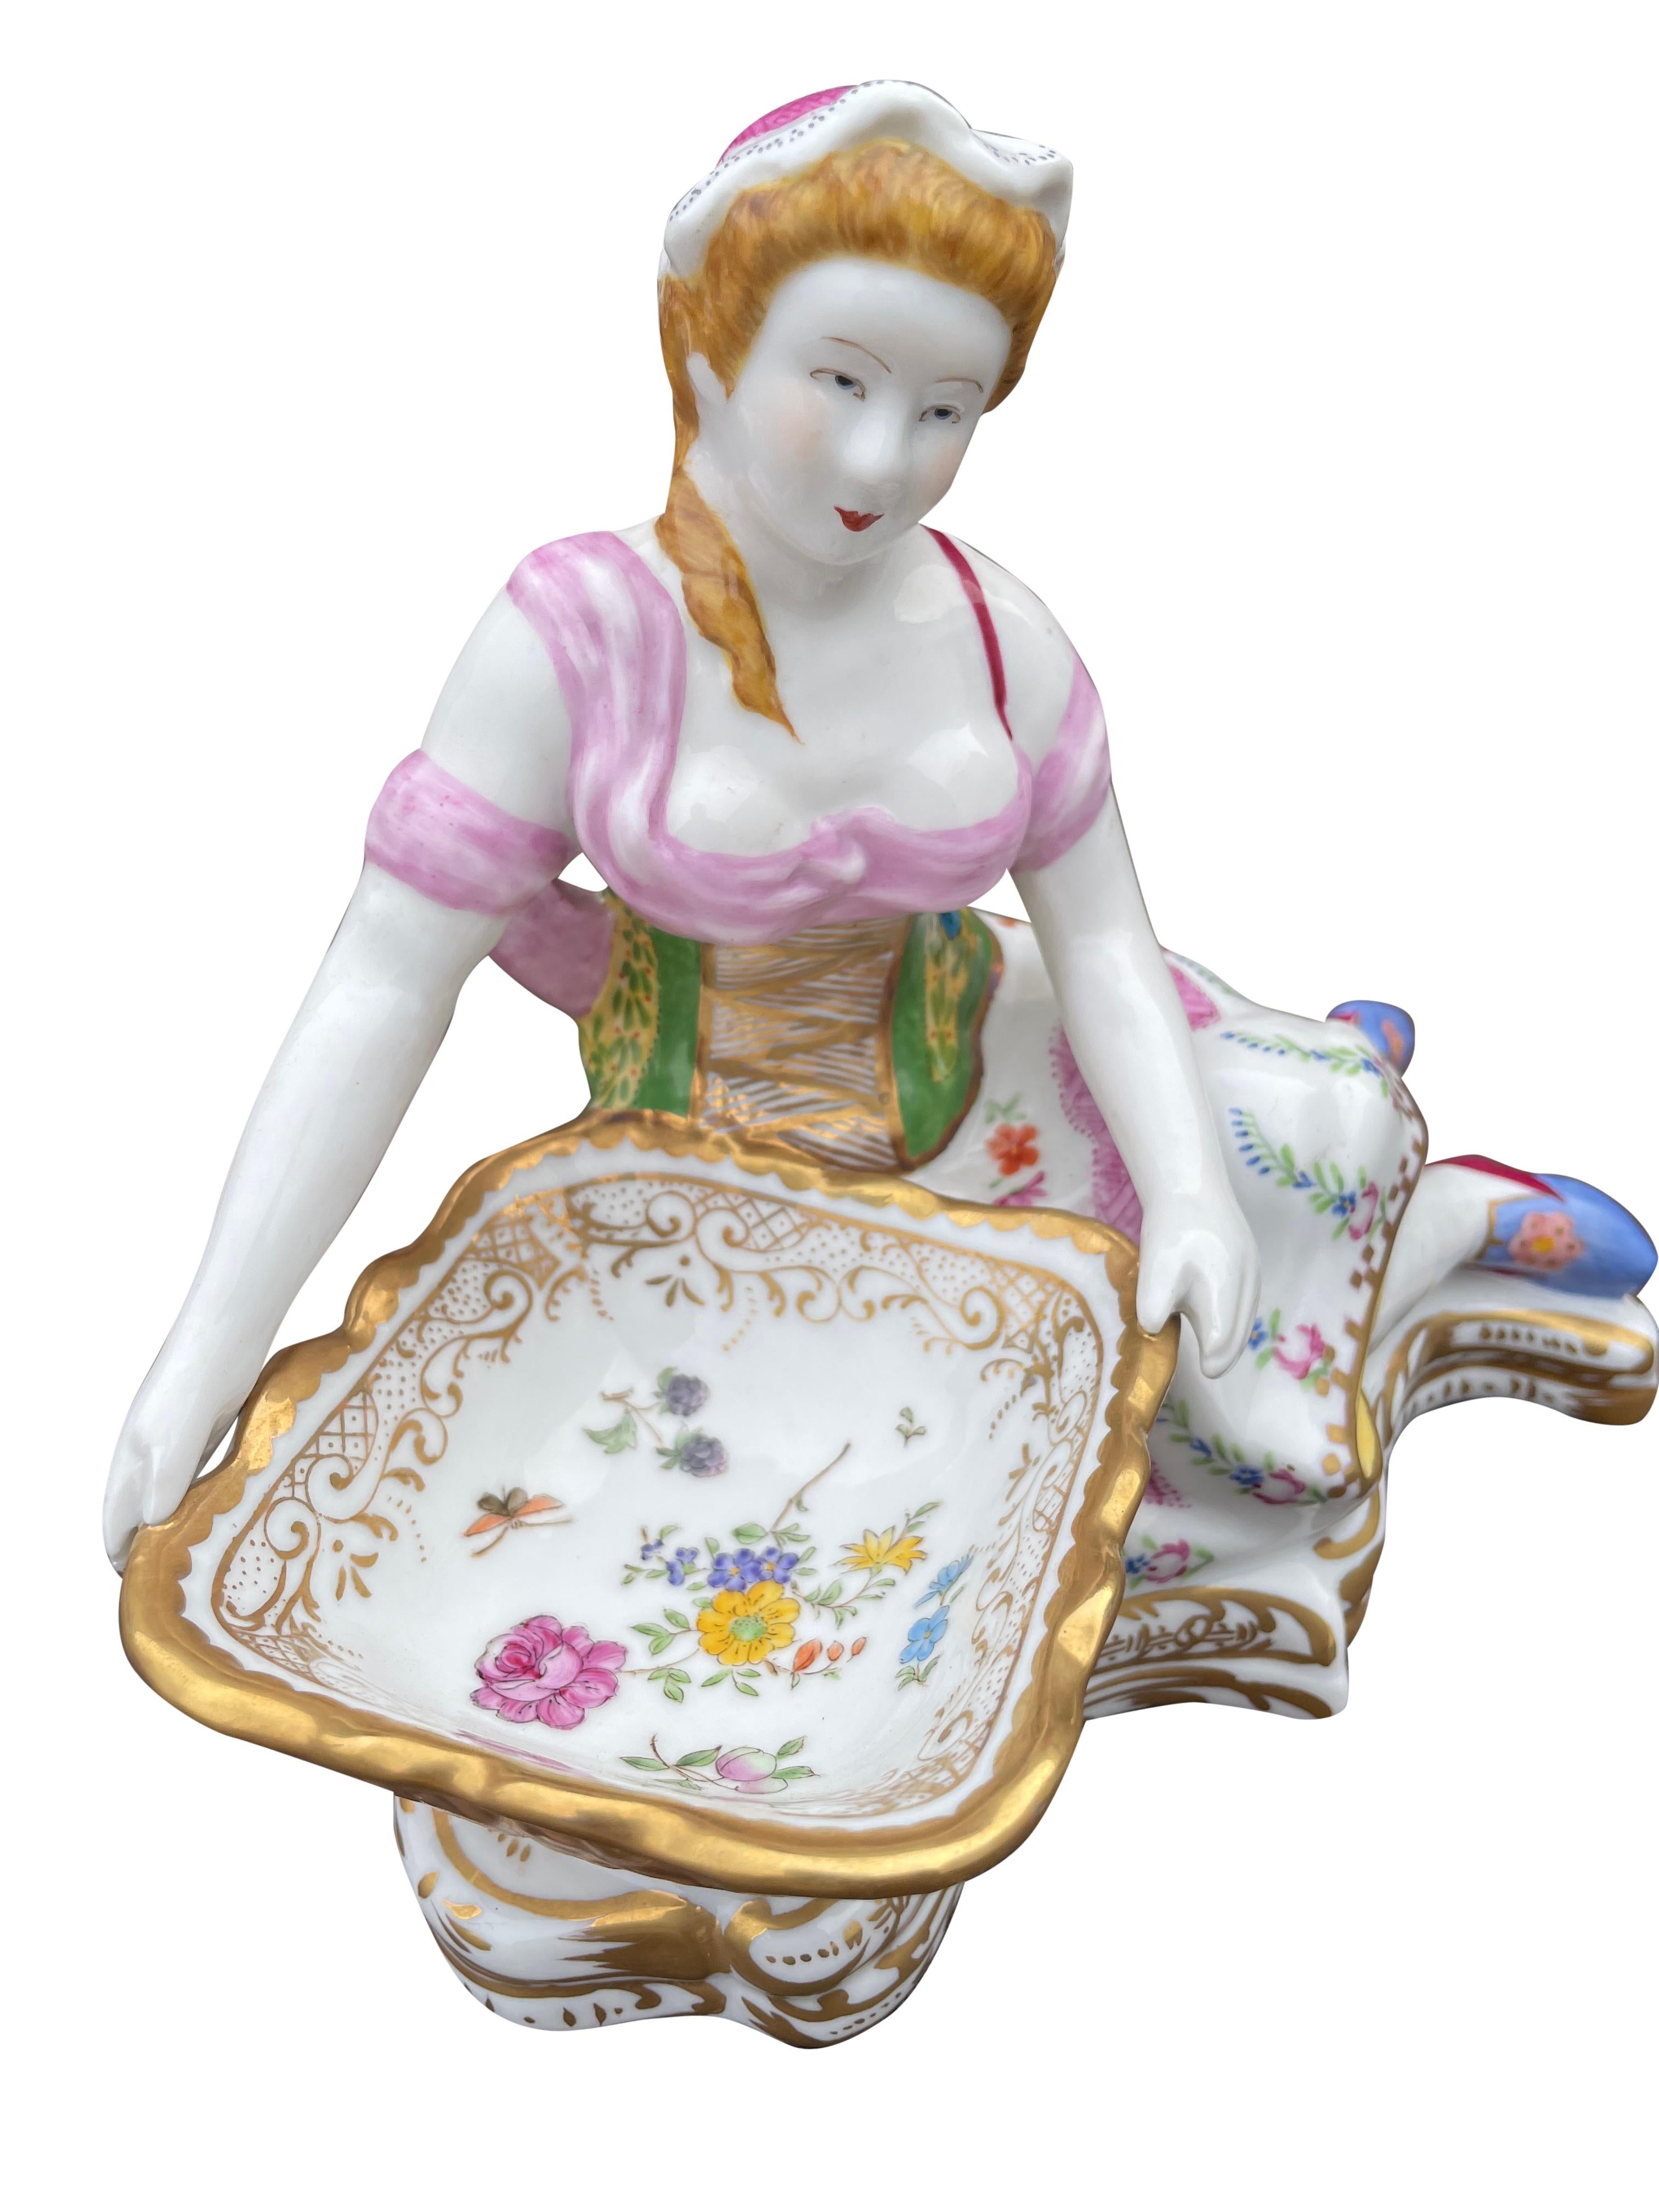 A superb pair of Meissen figurine sweet dishes, 20th century. Scenes of man and woman beautifully hand painted.